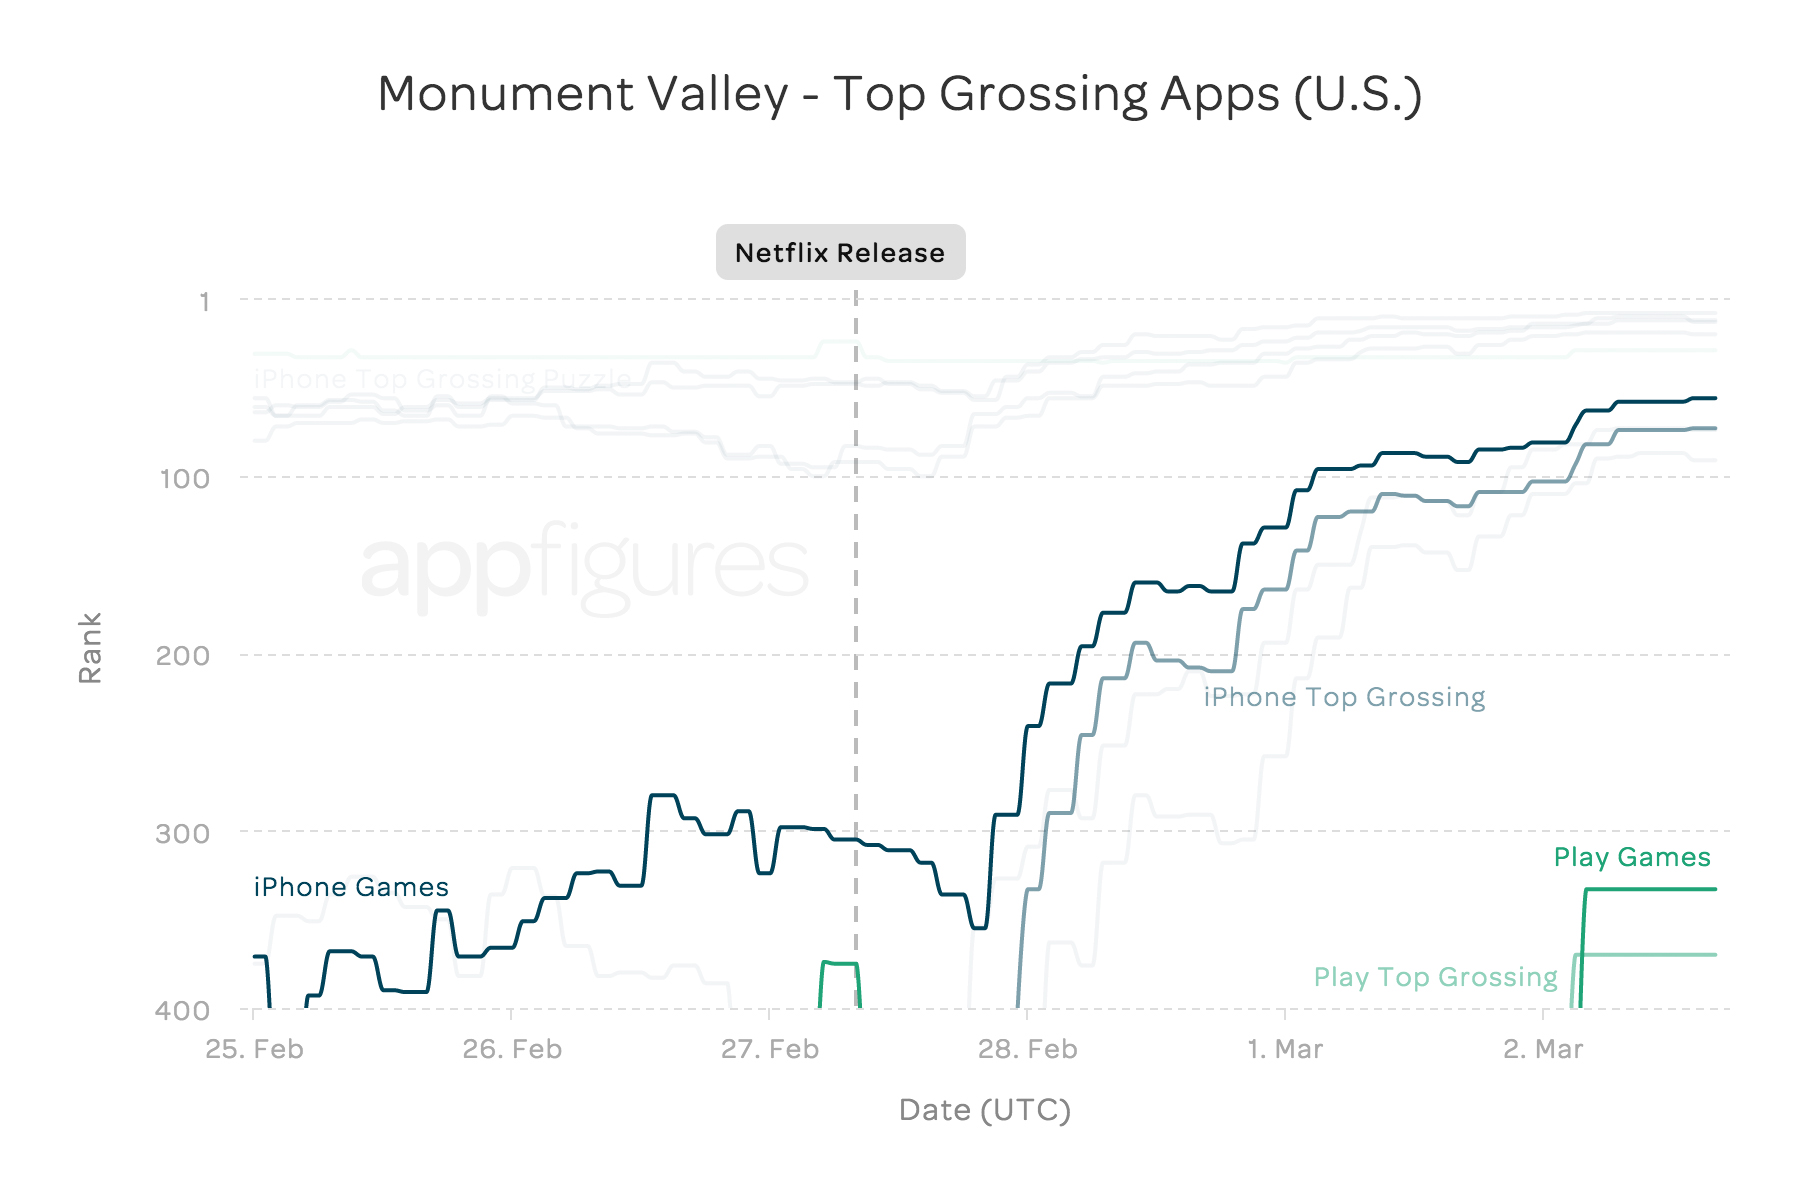 Monument Valley House of Cards Grossing App